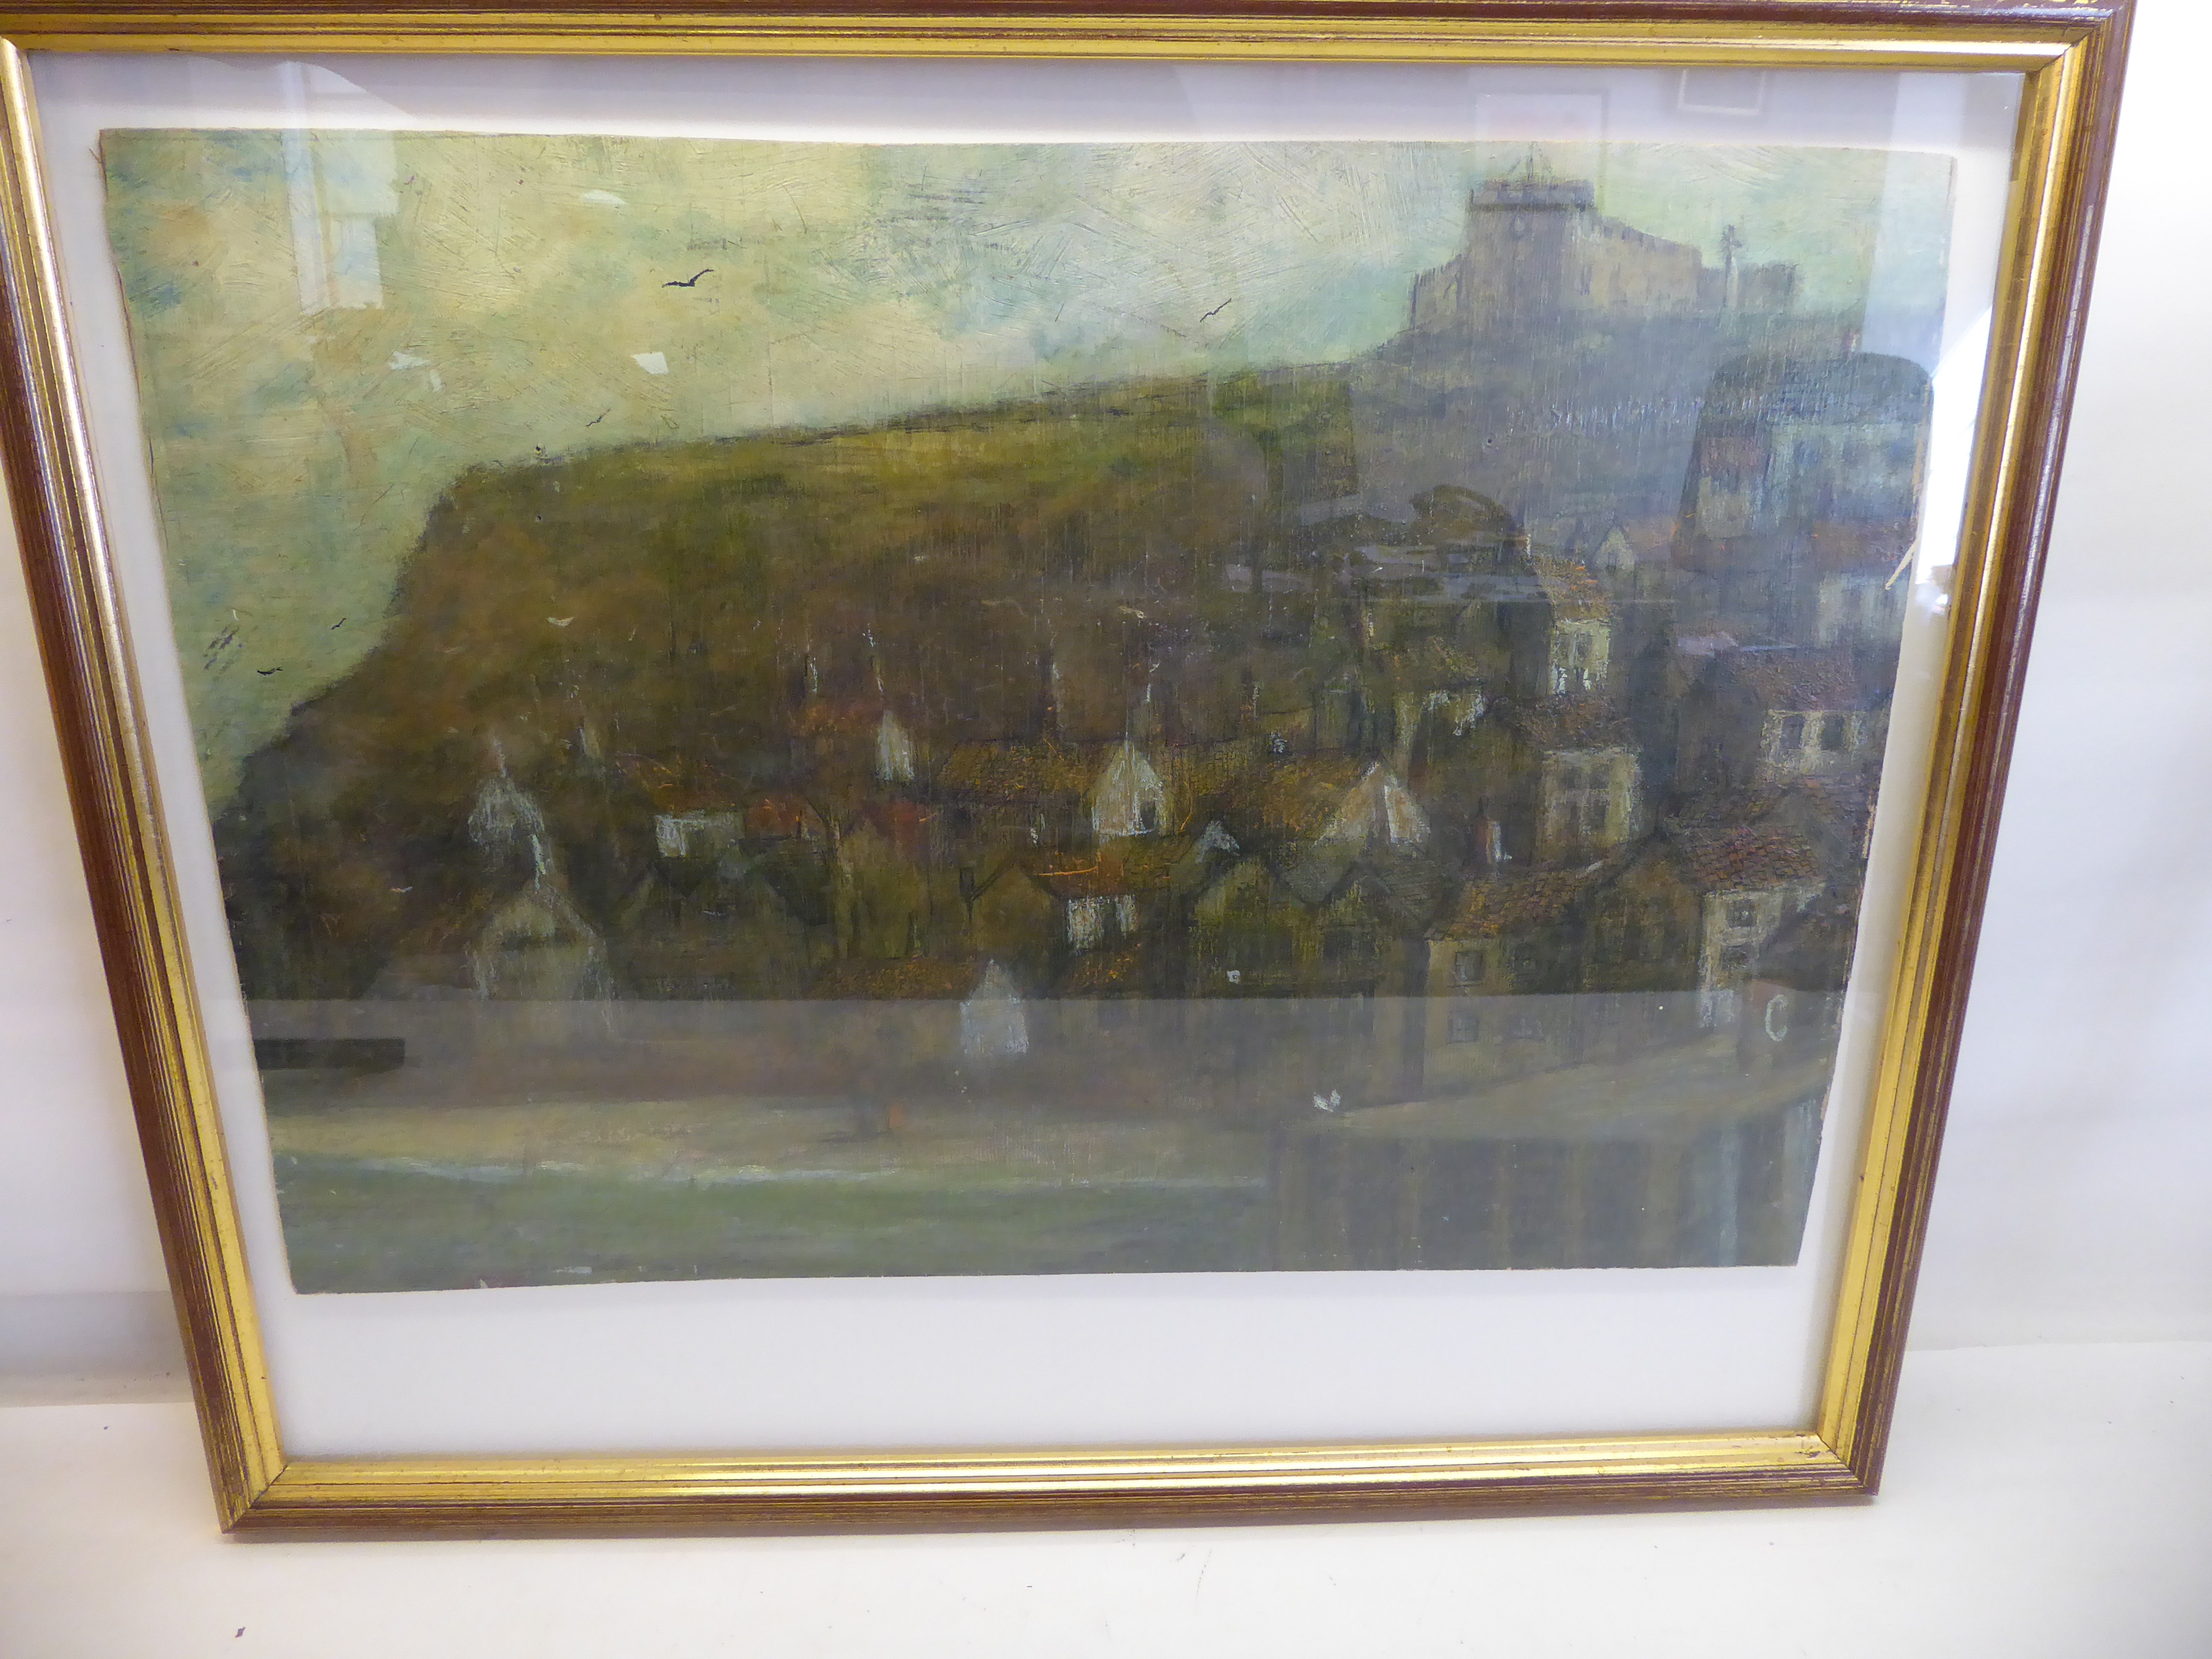 ALFRED BIRD; "The Old Fish Pier Whitby", with the abbey on the hilltop, oil on board, signed. 14" (